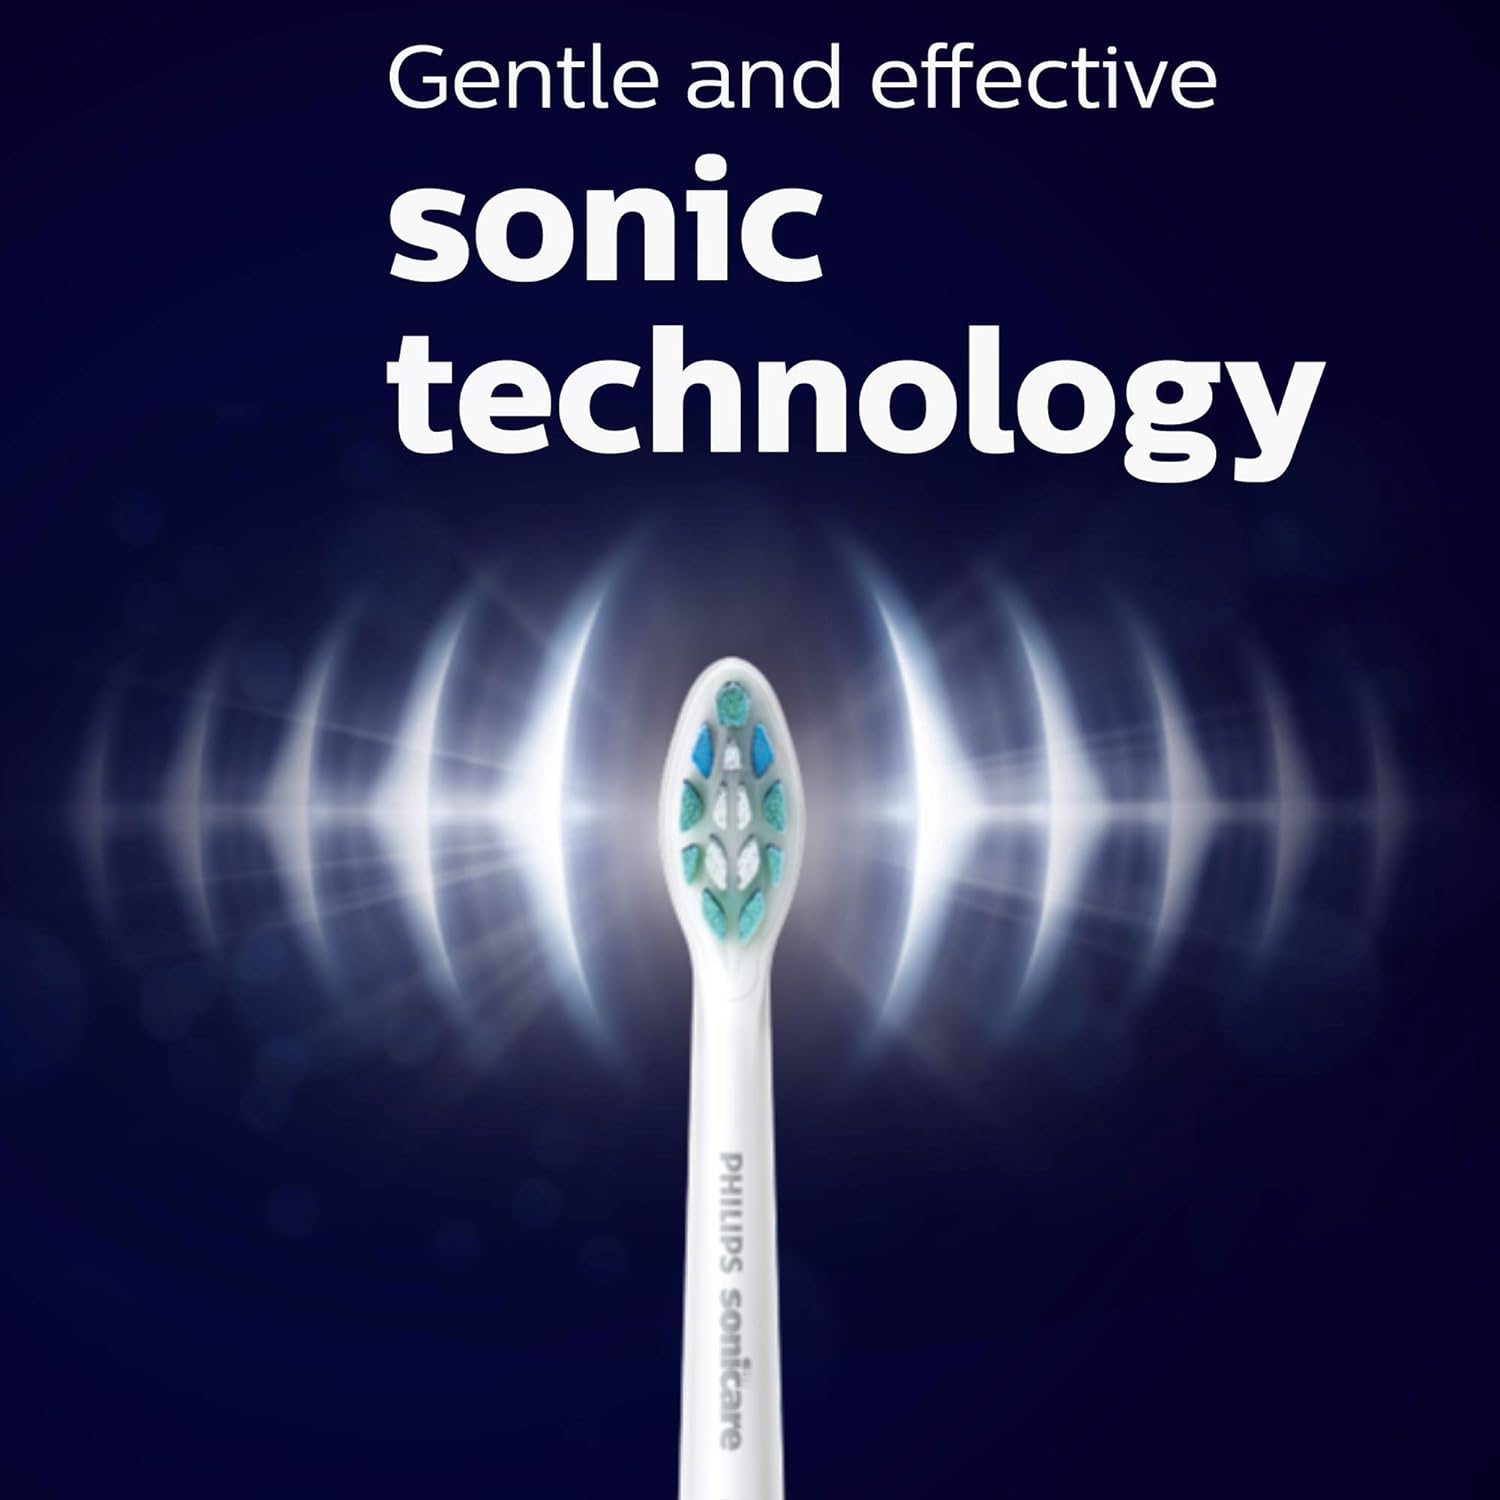 Philips Sonicare ProtectiveClean 4100 Plaque Control, Rechargeable electric toothbrush with pressure sensor, White Mint HX6817/01